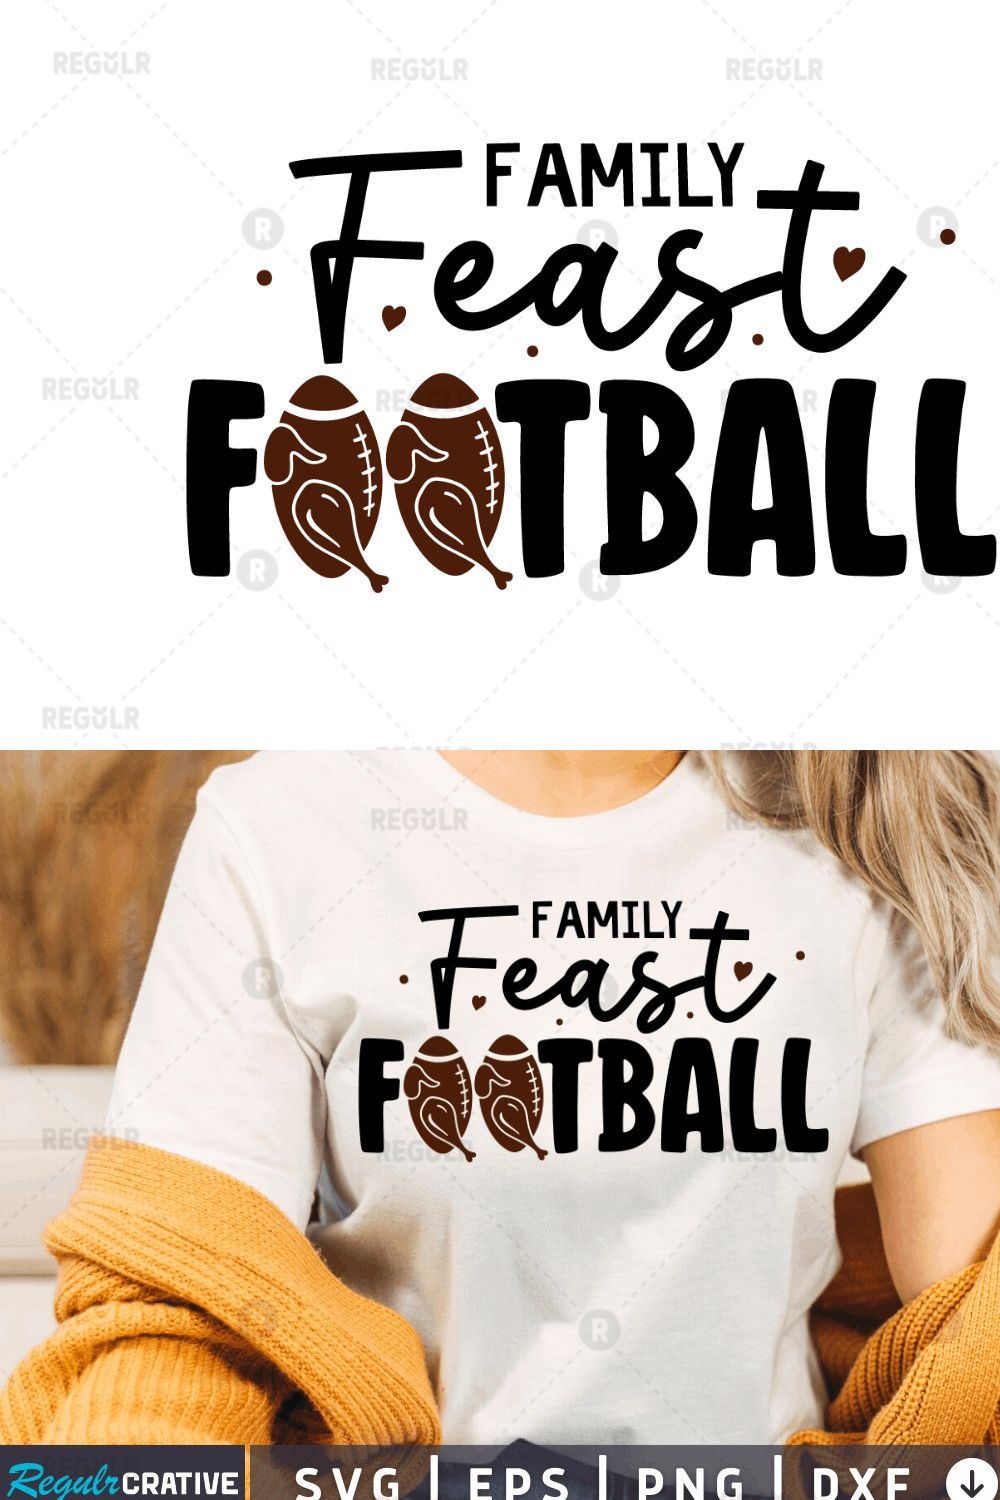 Family feast football SVG pinterest preview image.